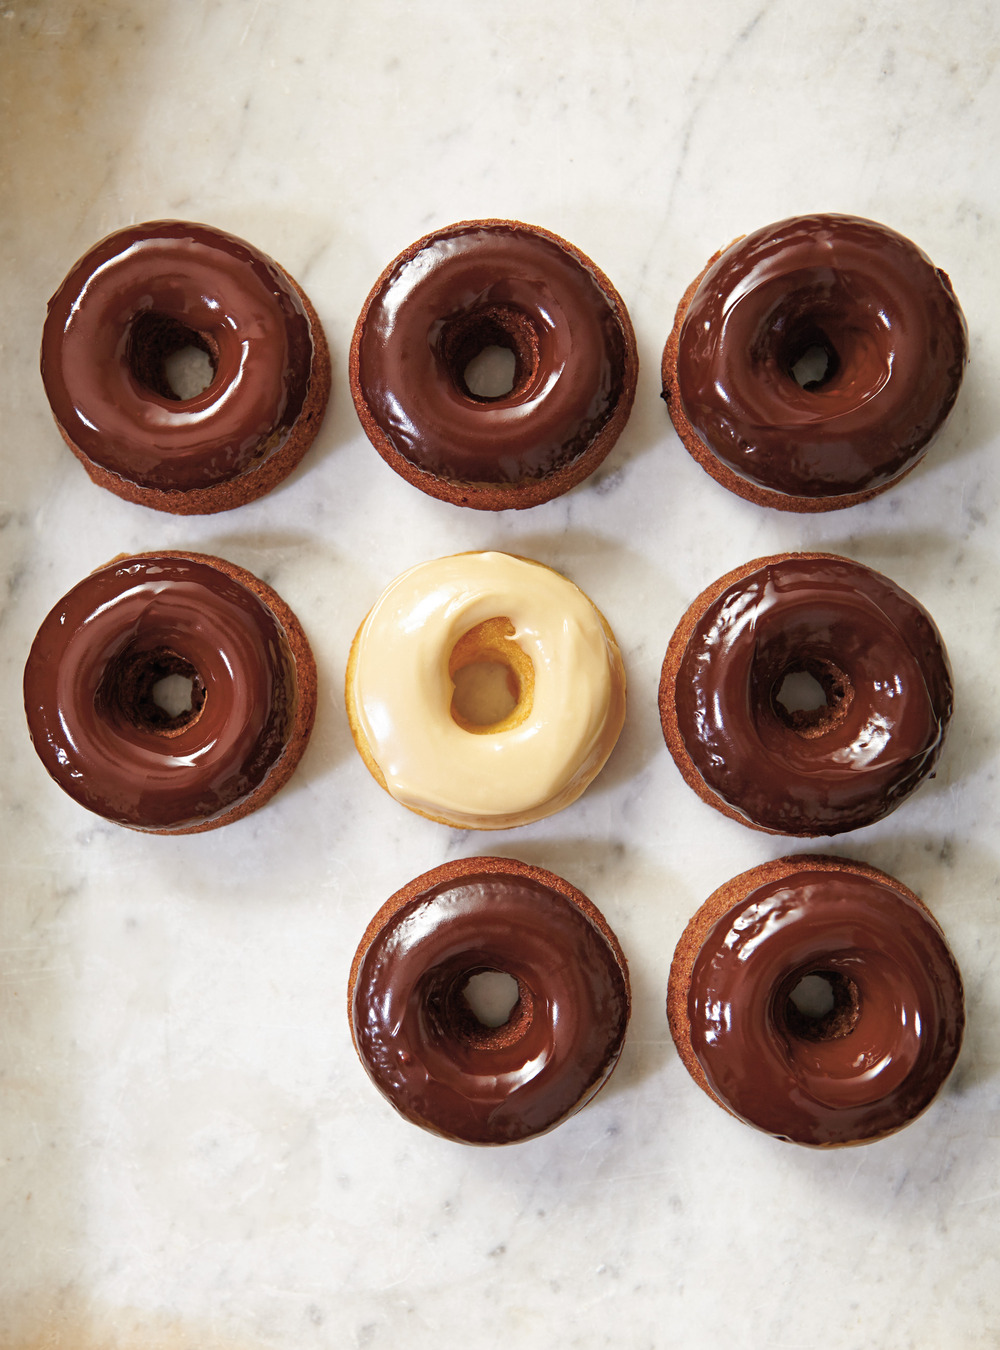 Oven-baked doughnuts 